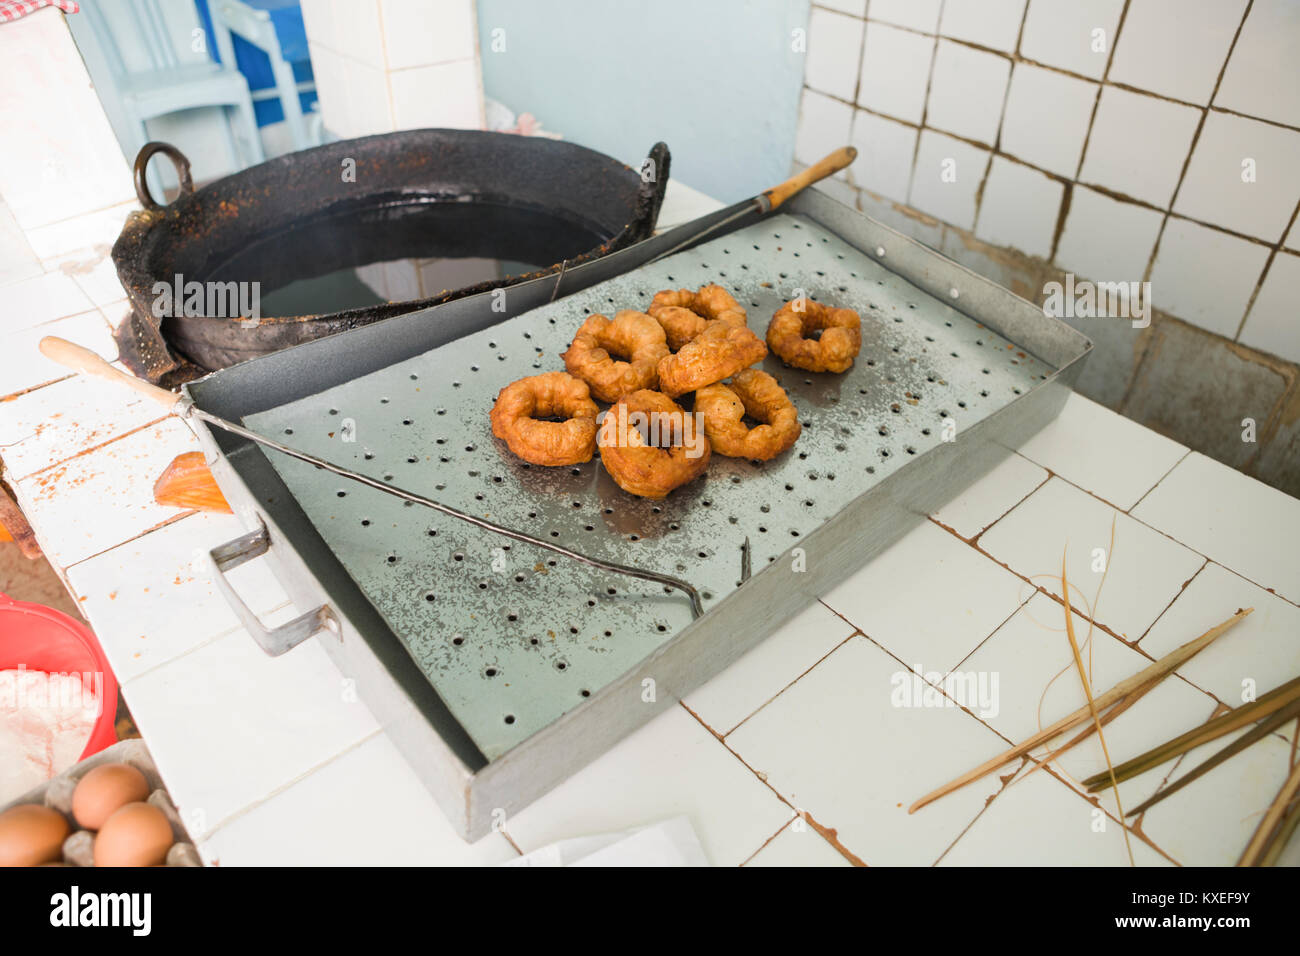 Sfenj or North African doughnut shop, cooked in oil. Chefchaouen, Morocco Stock Photo